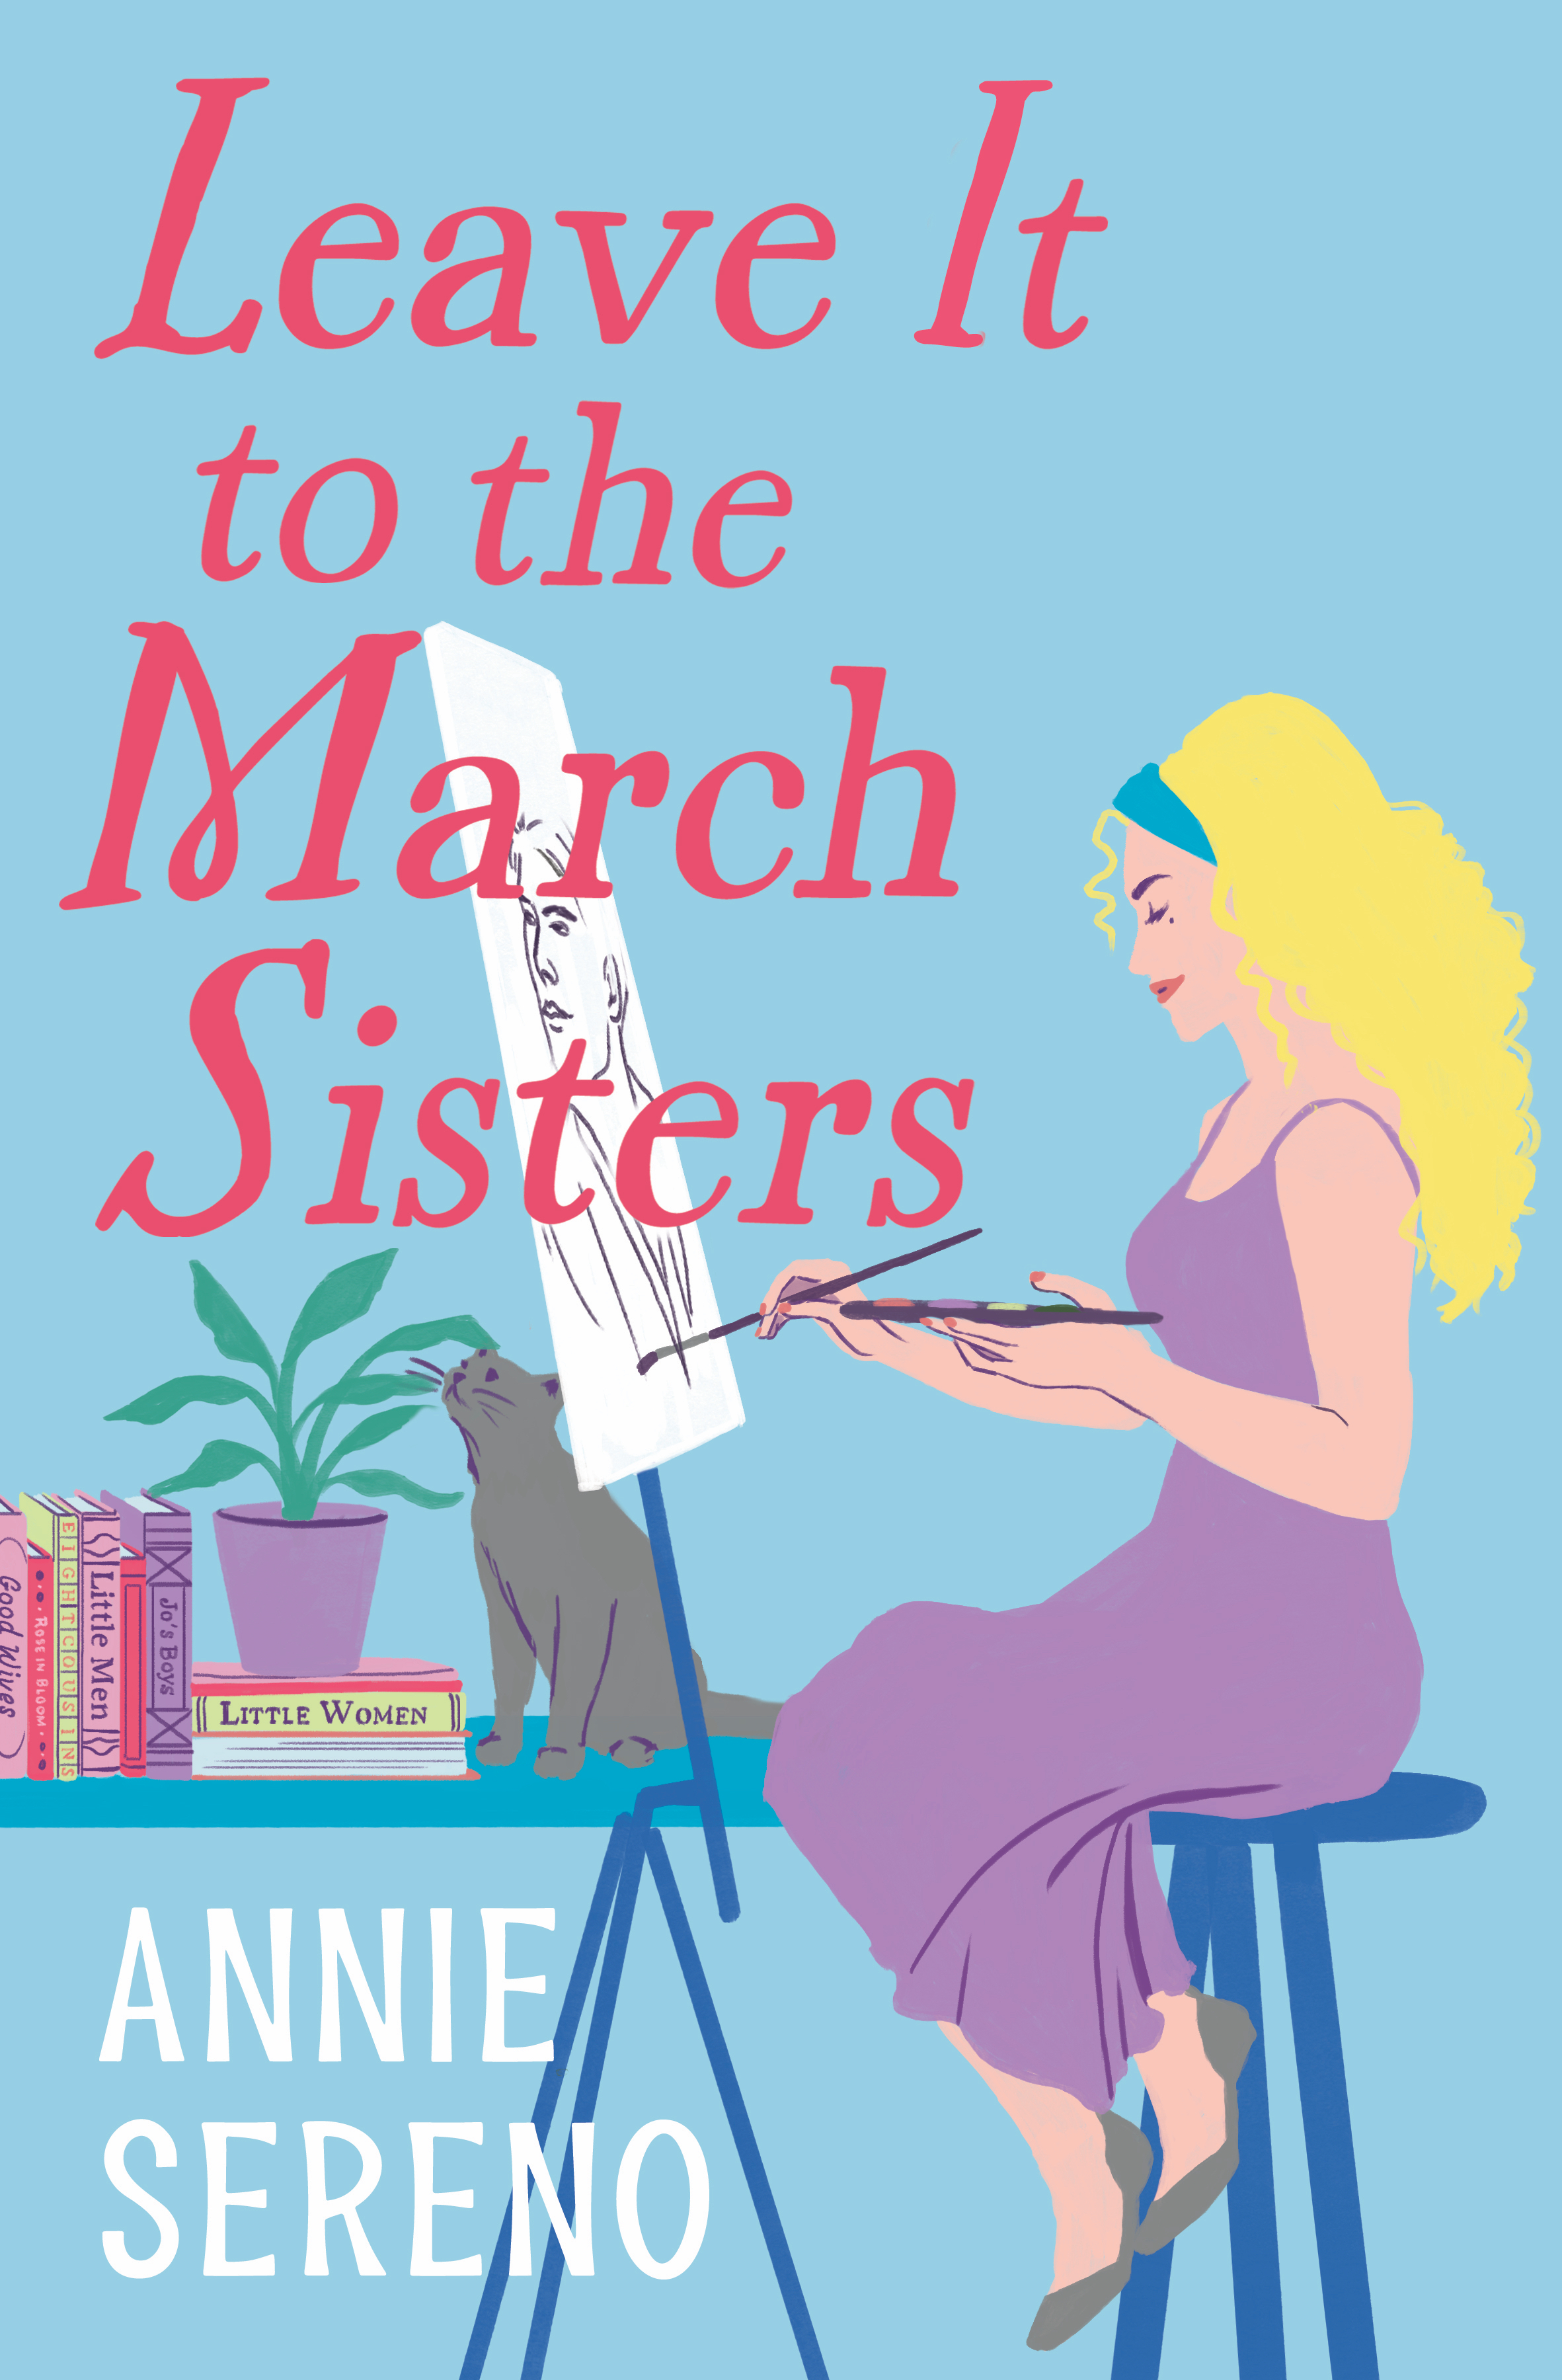 Leave It to the March Sisters by Annie Sereno | Hachette Book Group